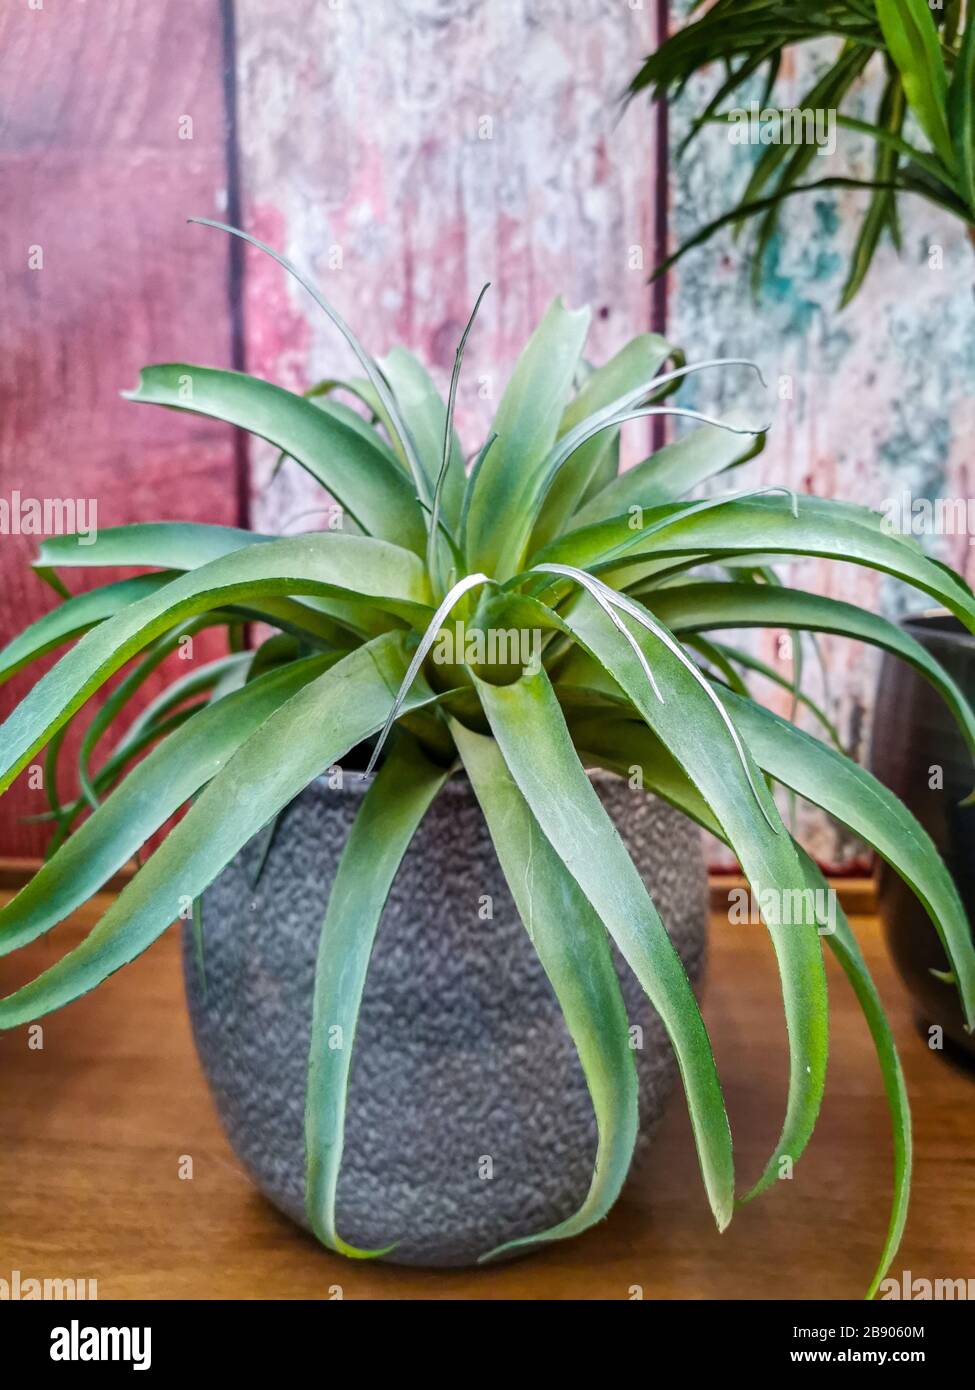 Large bromeliad air plant in a grey pot indoors Stock Photo